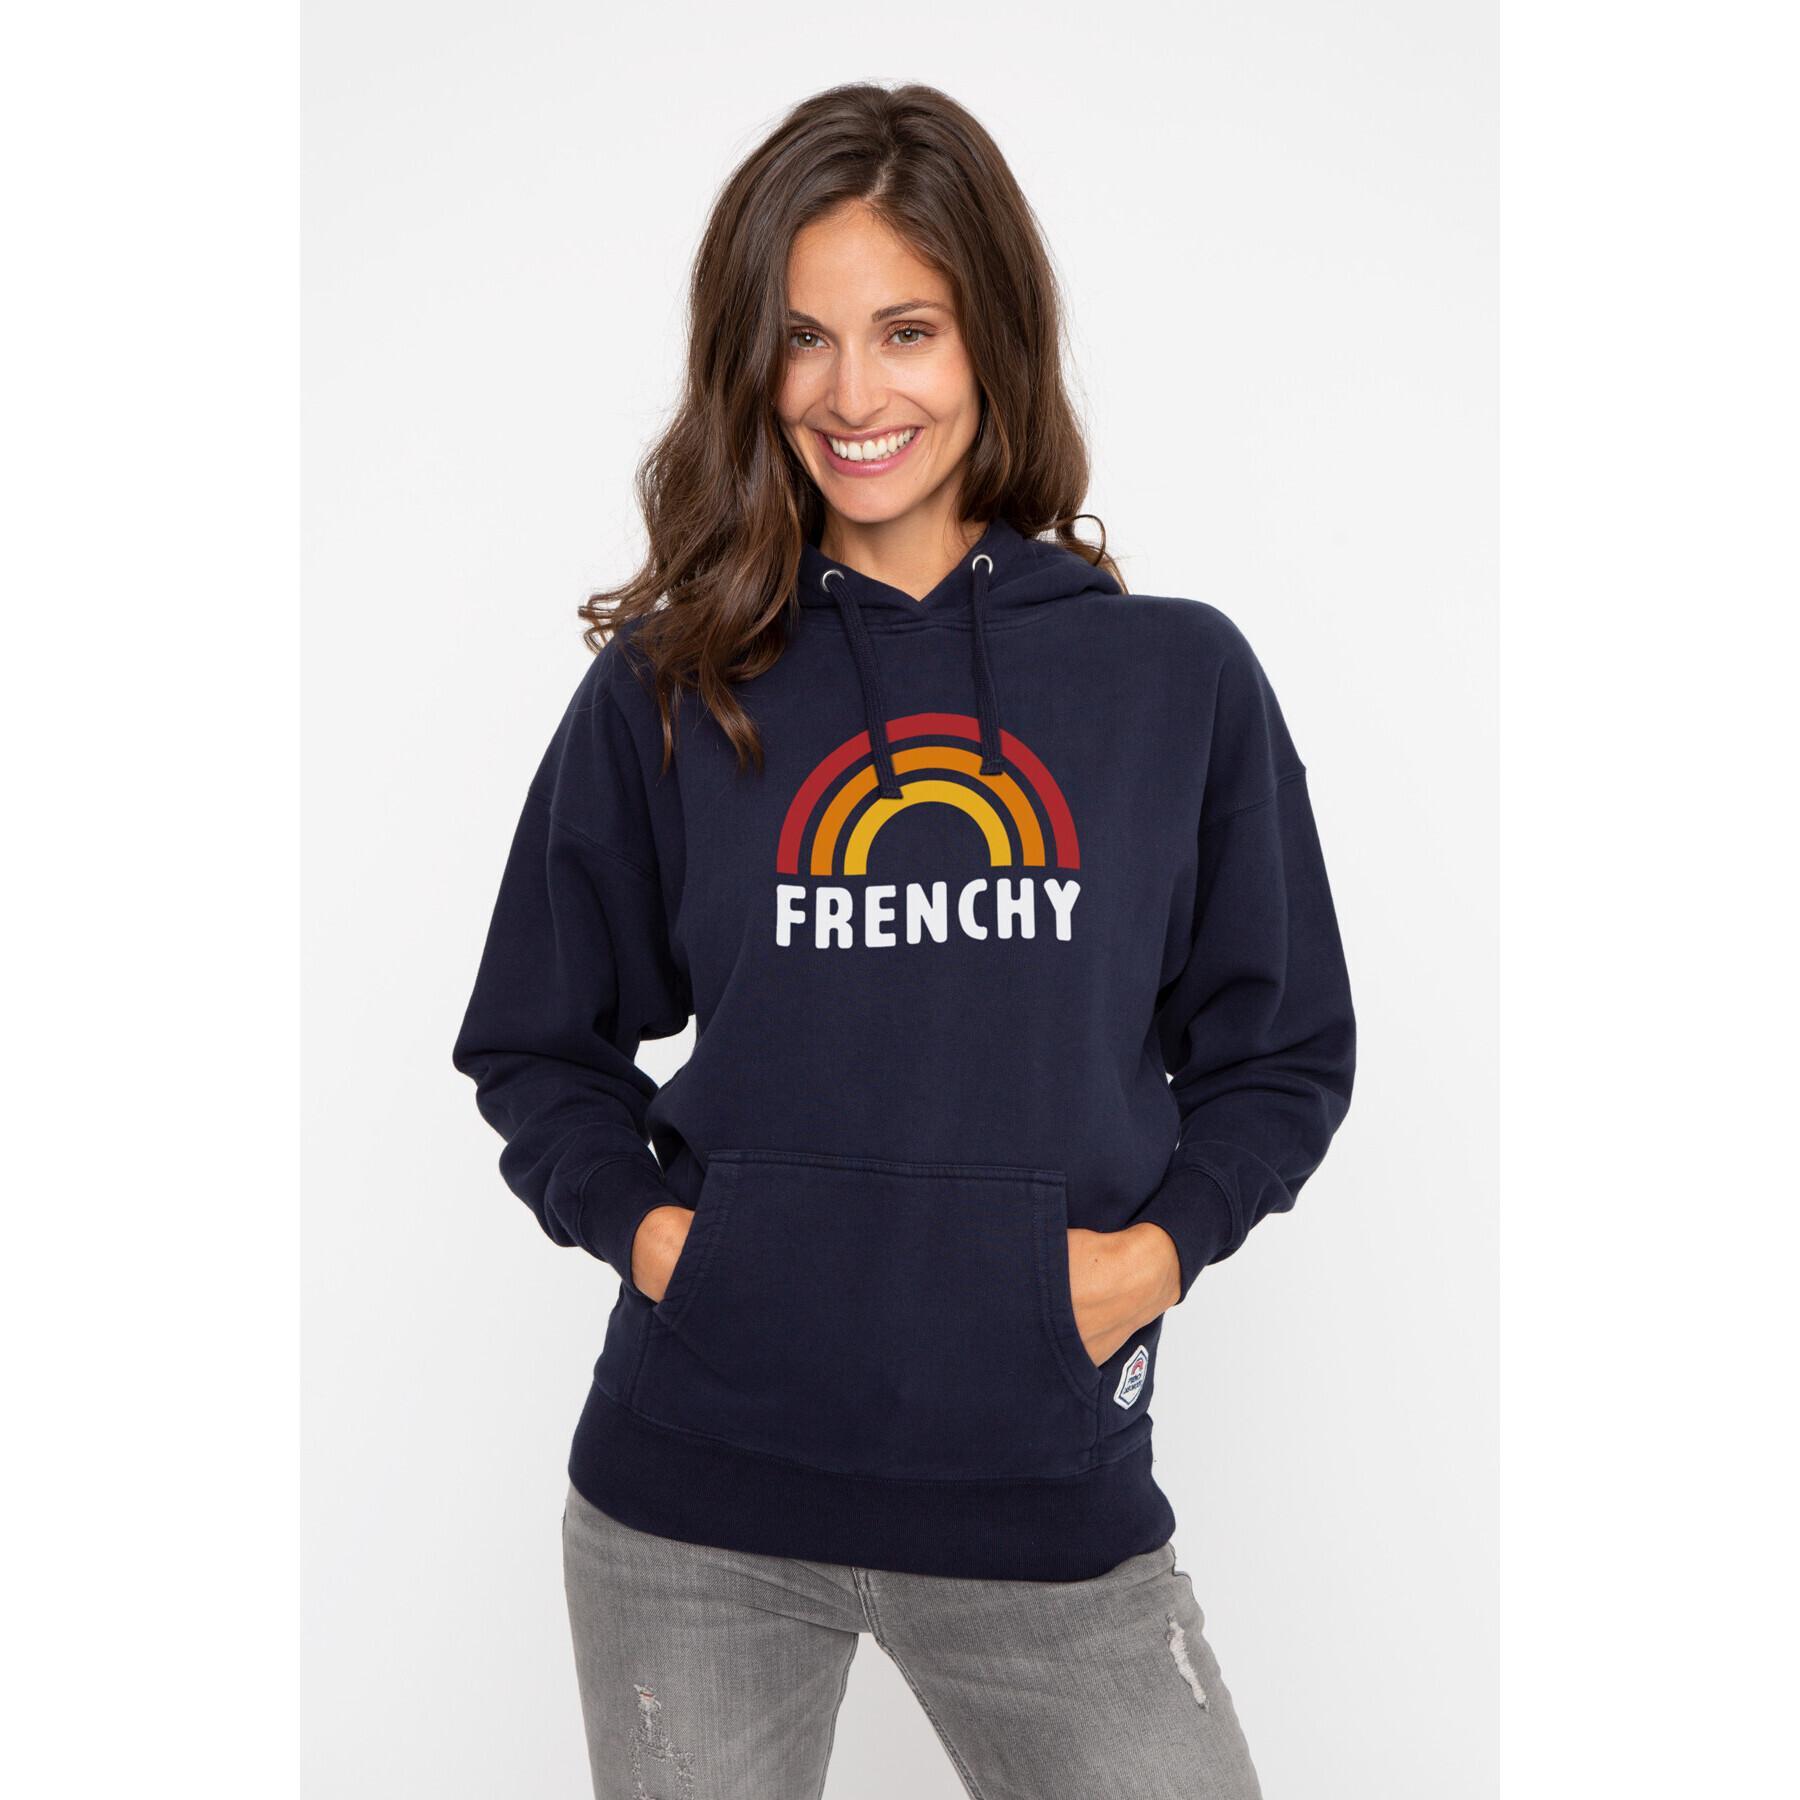 Women's Hoodie French Disorder Kenny Frenchy